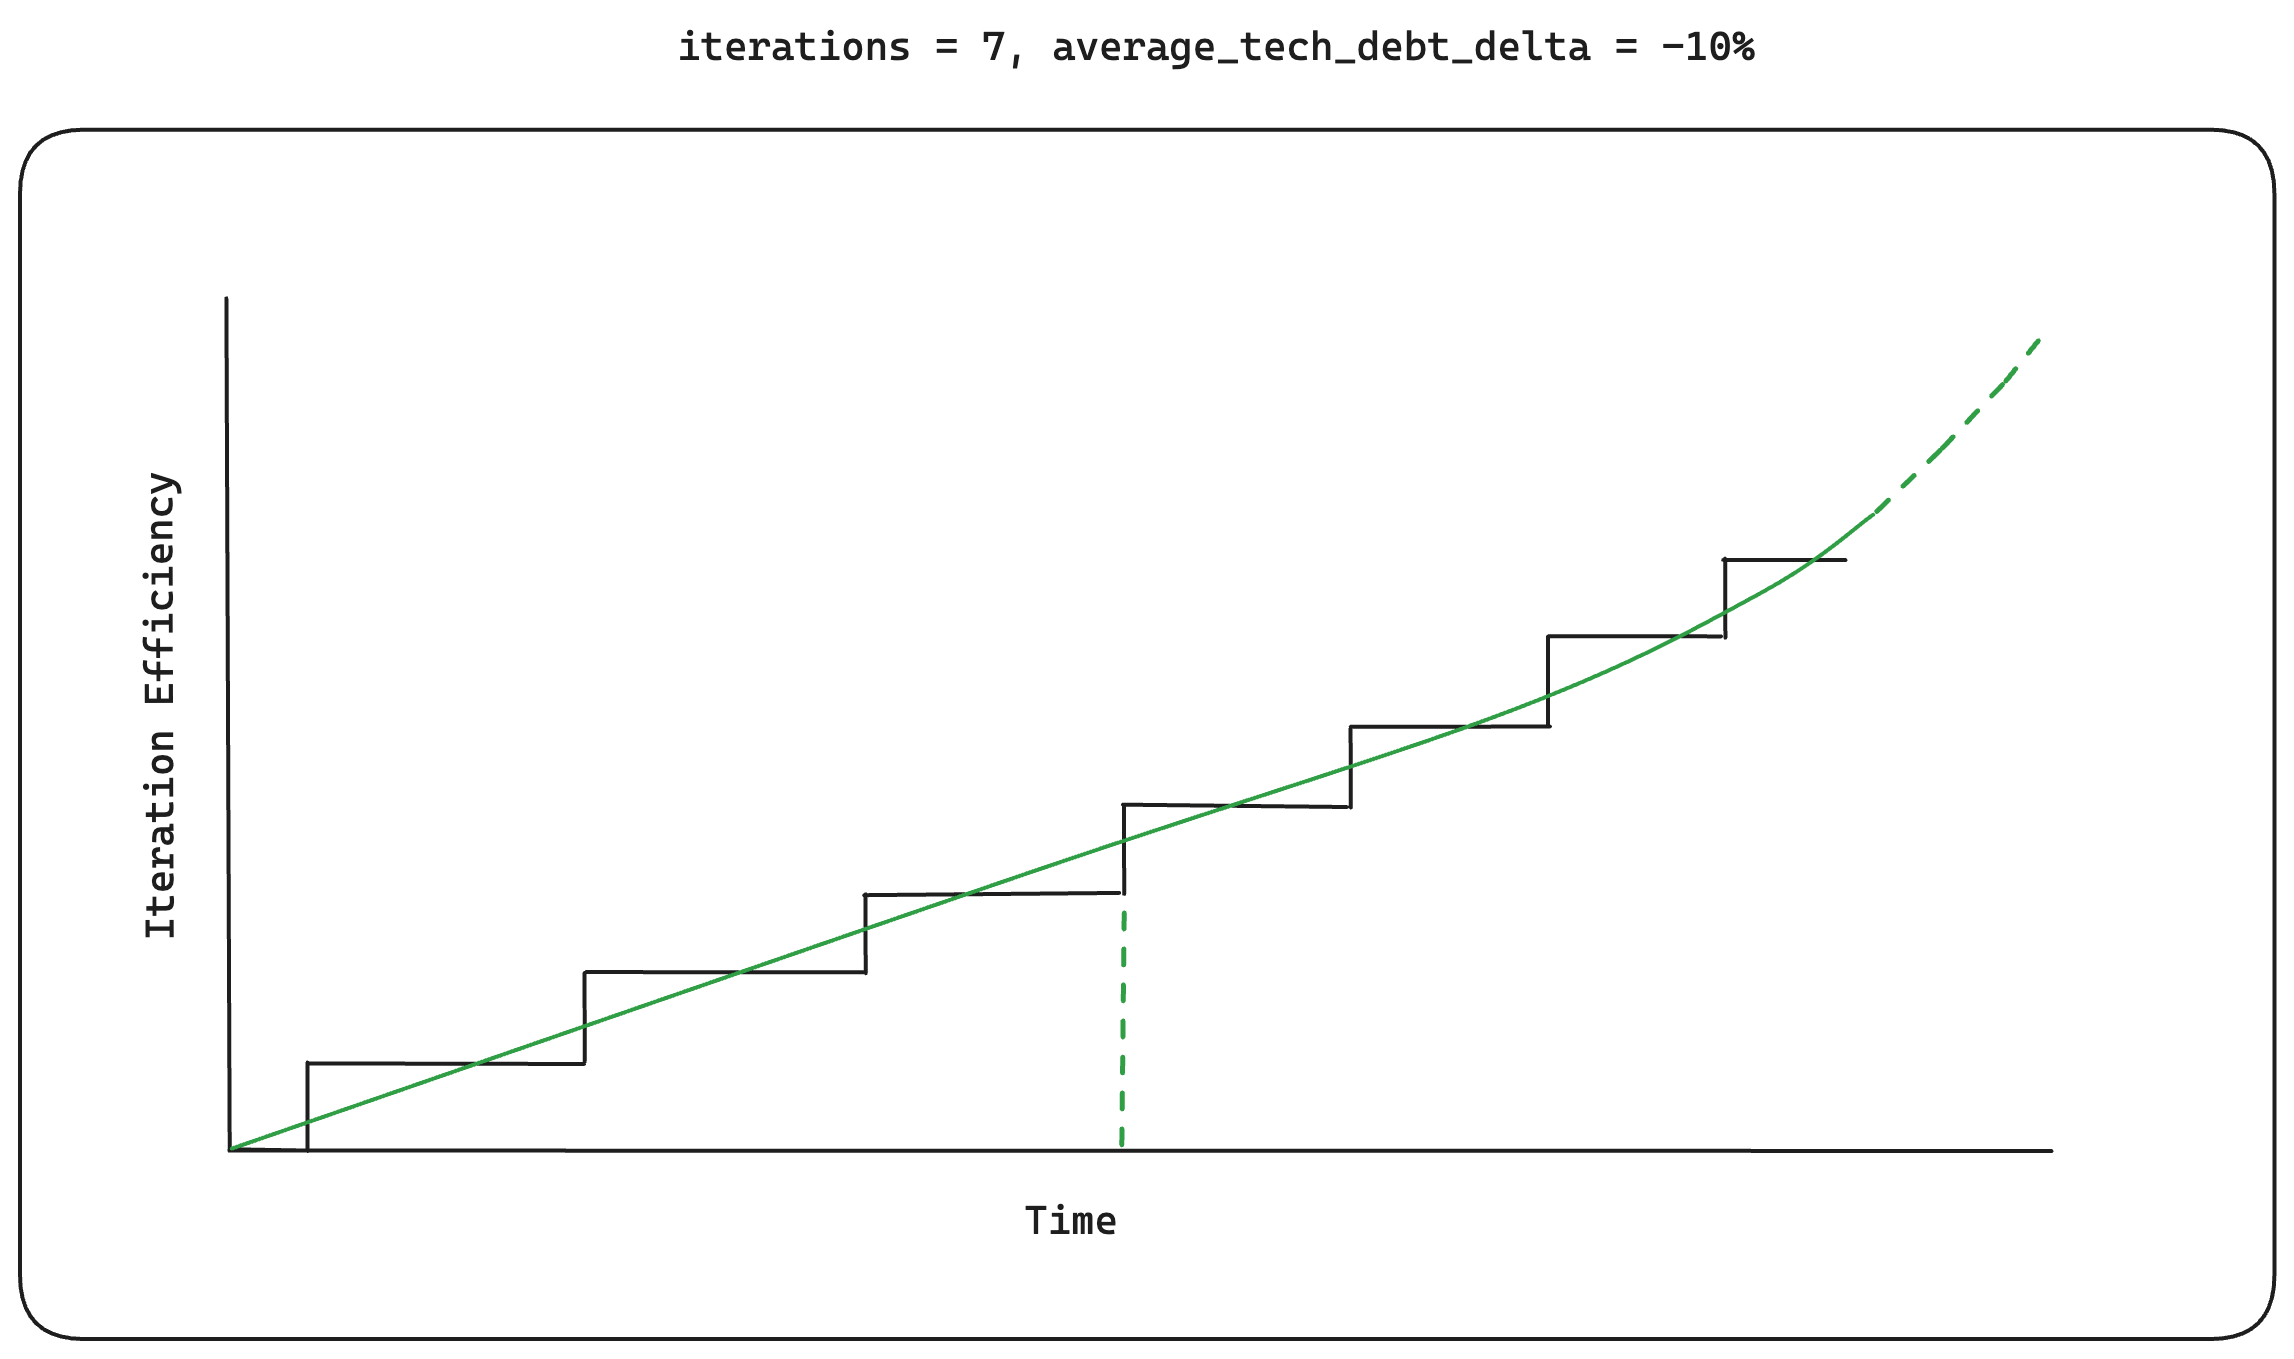 A chart showing iteration efficiency over 7 iterations with an average technical debt delta of -10%